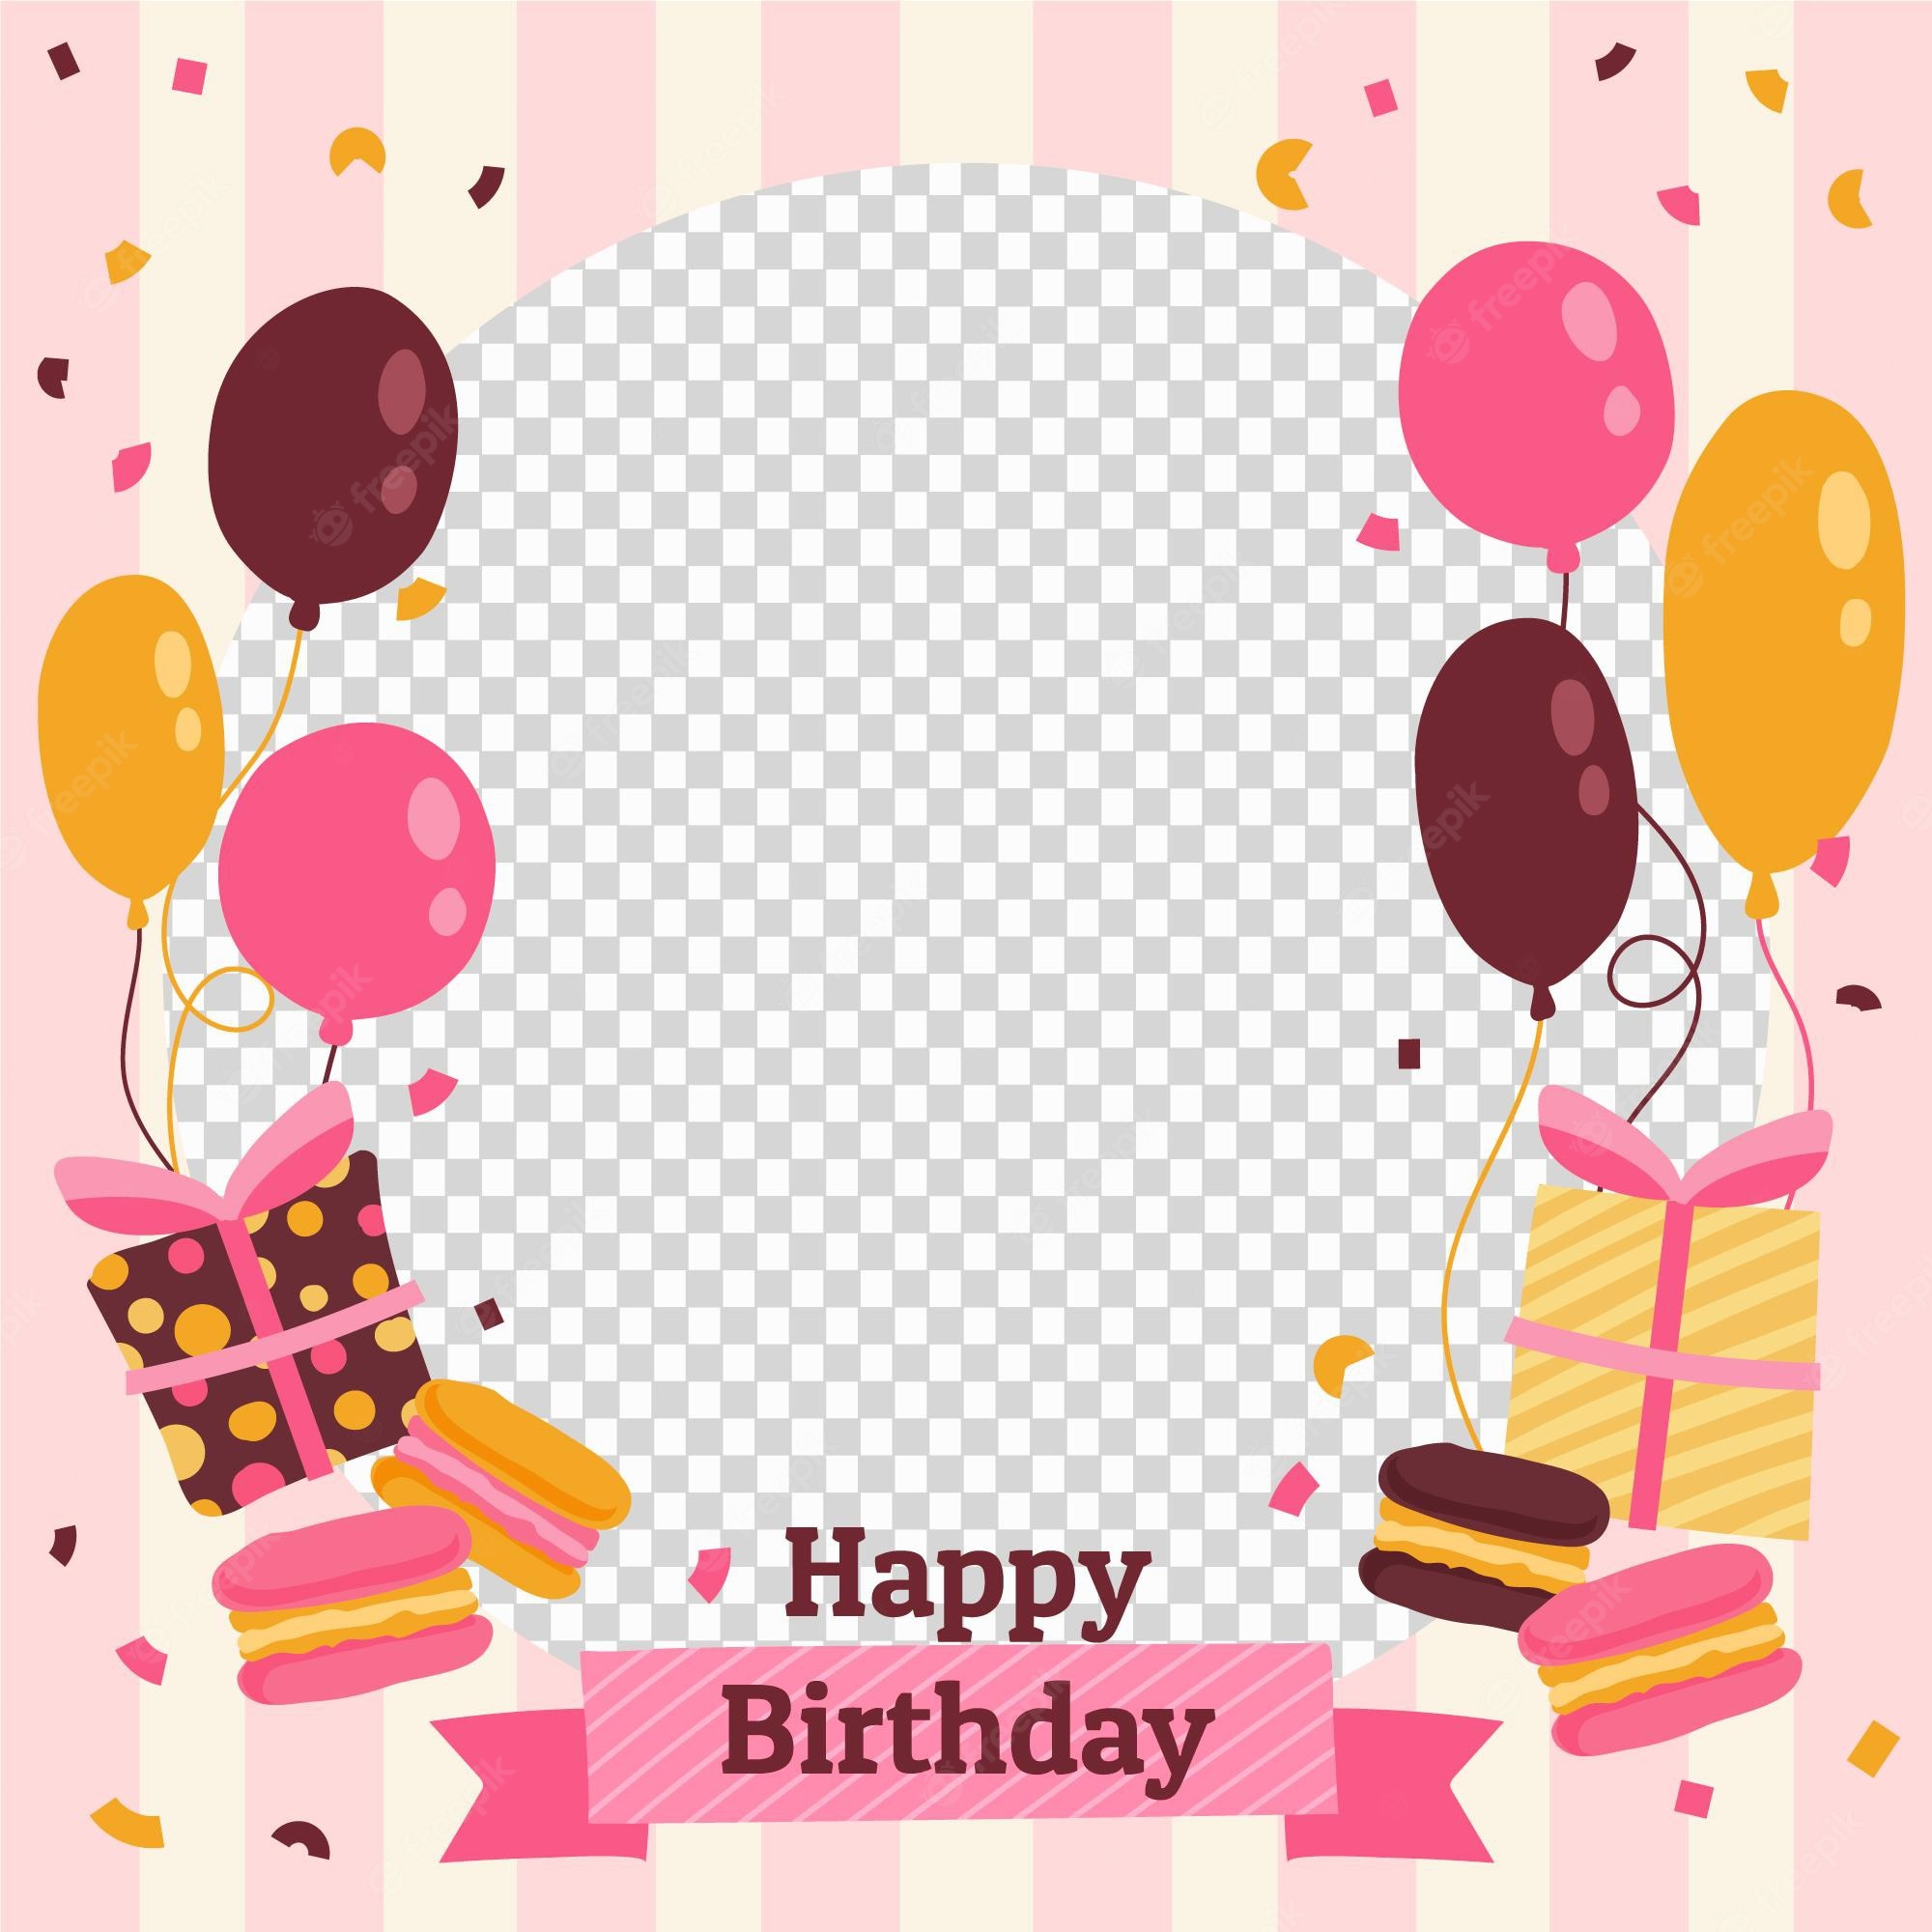 Birthday Frames Wallpapers - Wallpaper Cave